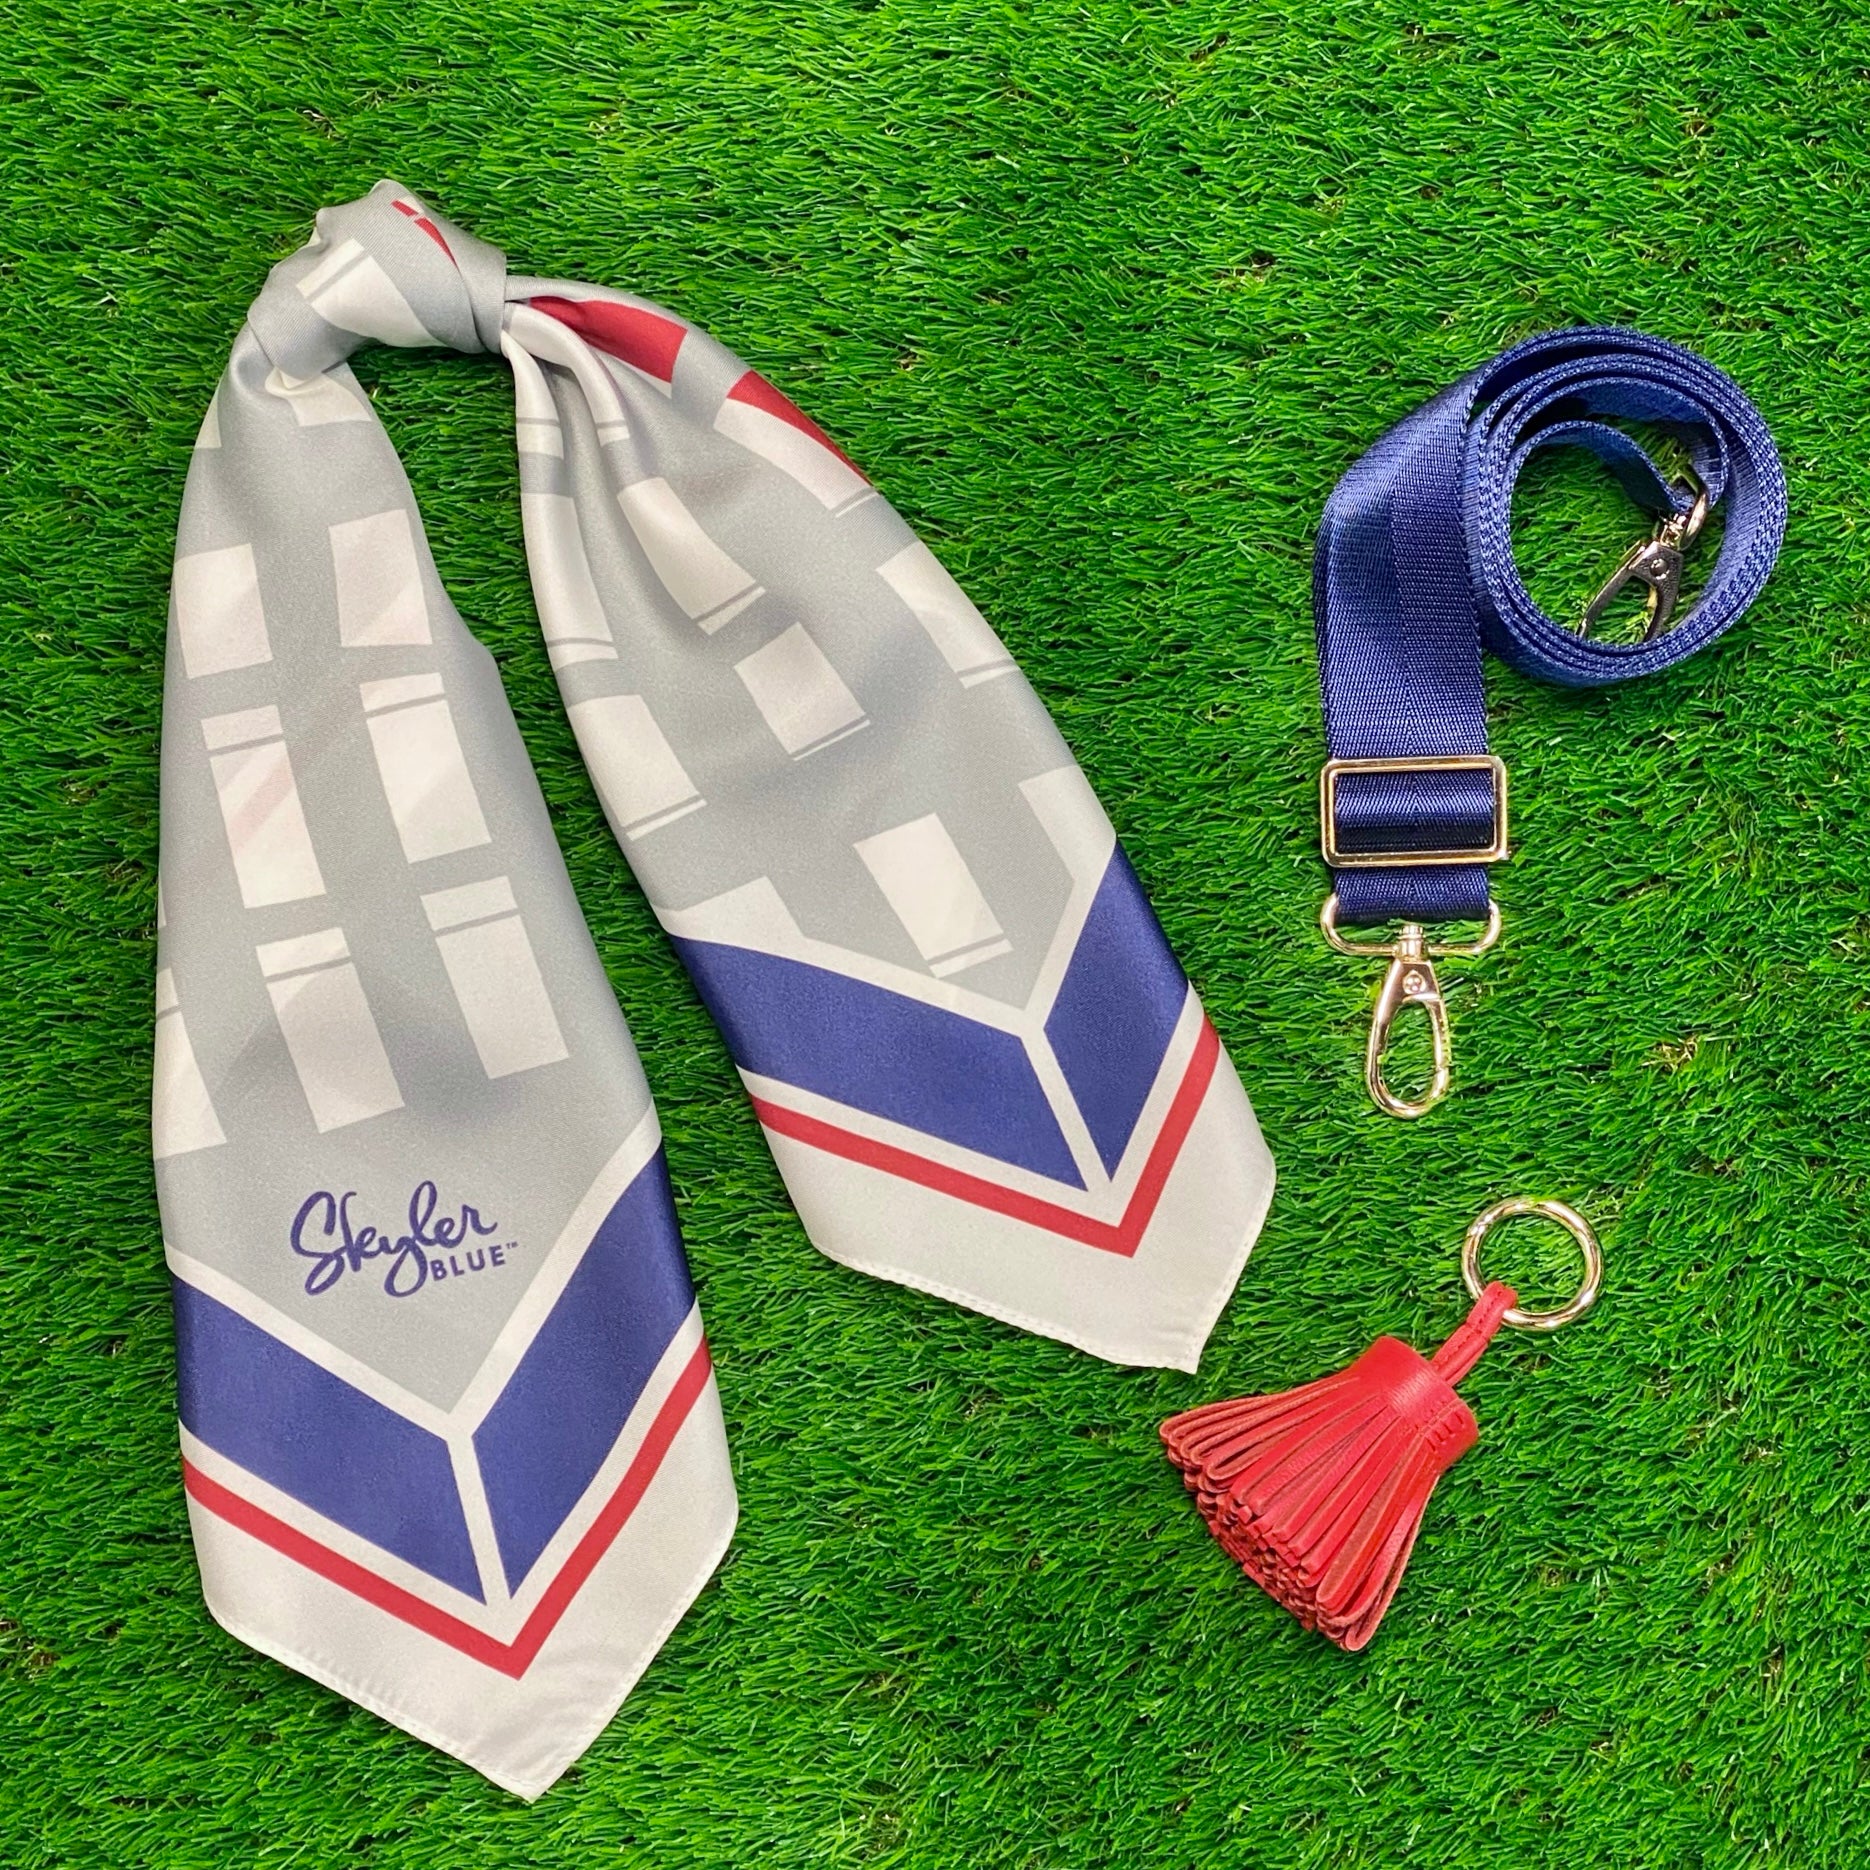 Skyler Blue’s The Dome - Go Texan Day Accessory Package including adjustable, nylon webbing shoulder or crossbody strap with herringbone weave and gold hardware, 60-centimeter 100% silk twill scarf, and 100% genuine leather tassel. 